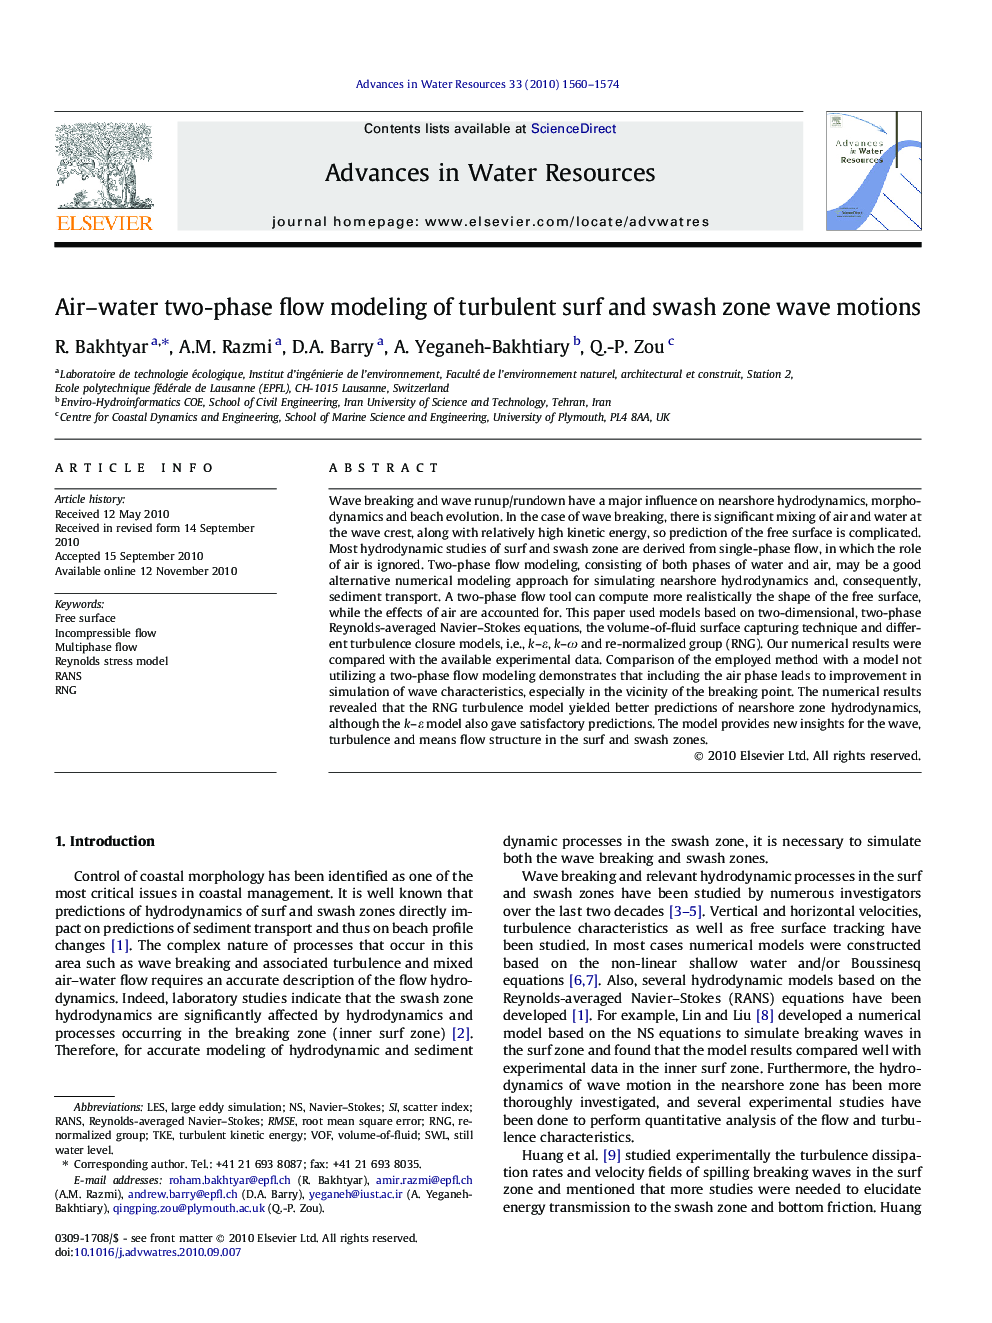 Air–water two-phase flow modeling of turbulent surf and swash zone wave motions